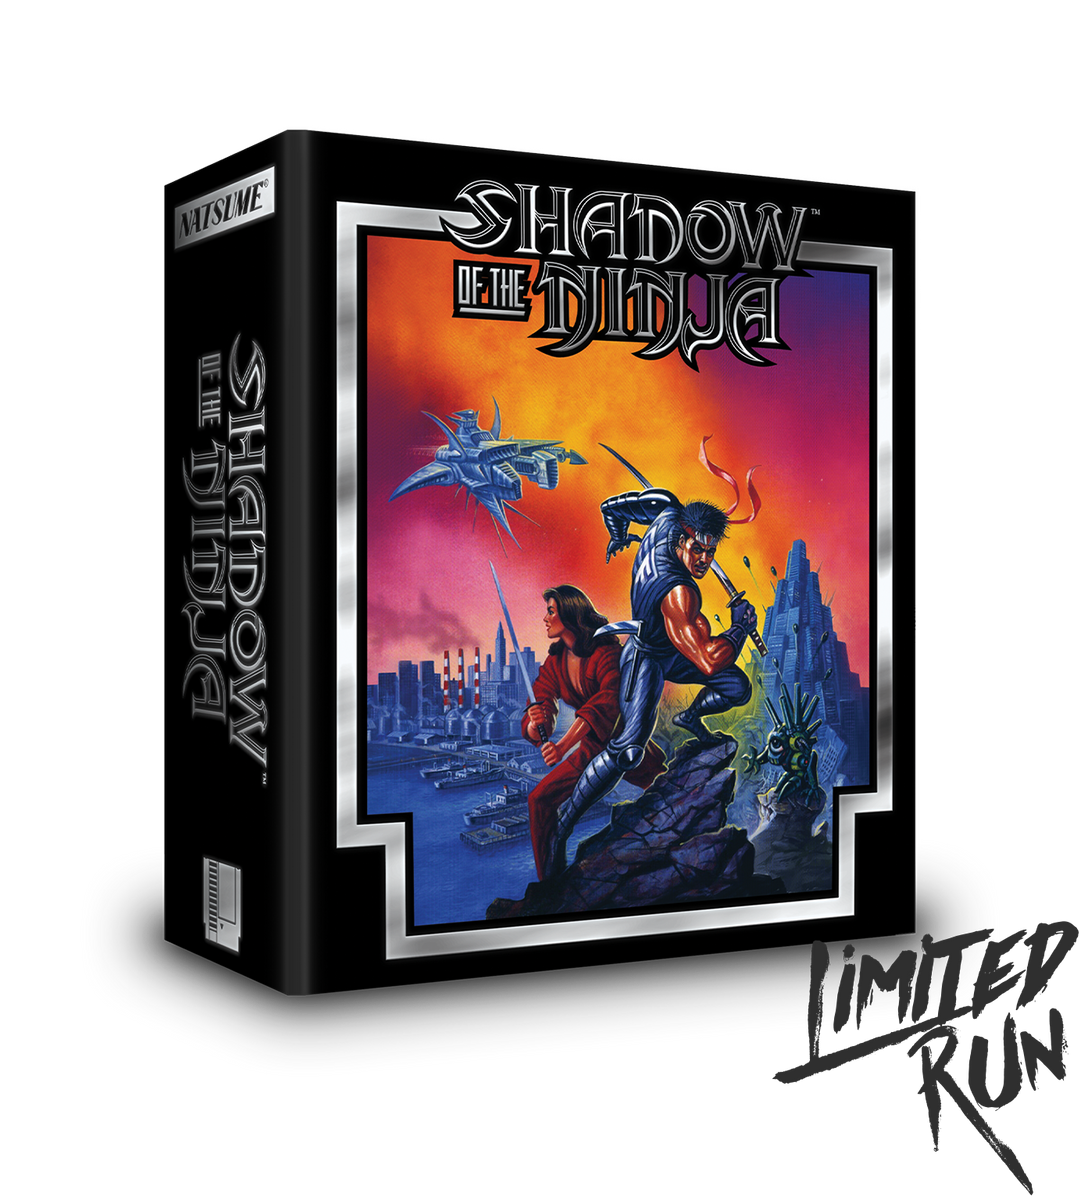 The Next Limited Run Games NES Game Is Shadow of the Ninja